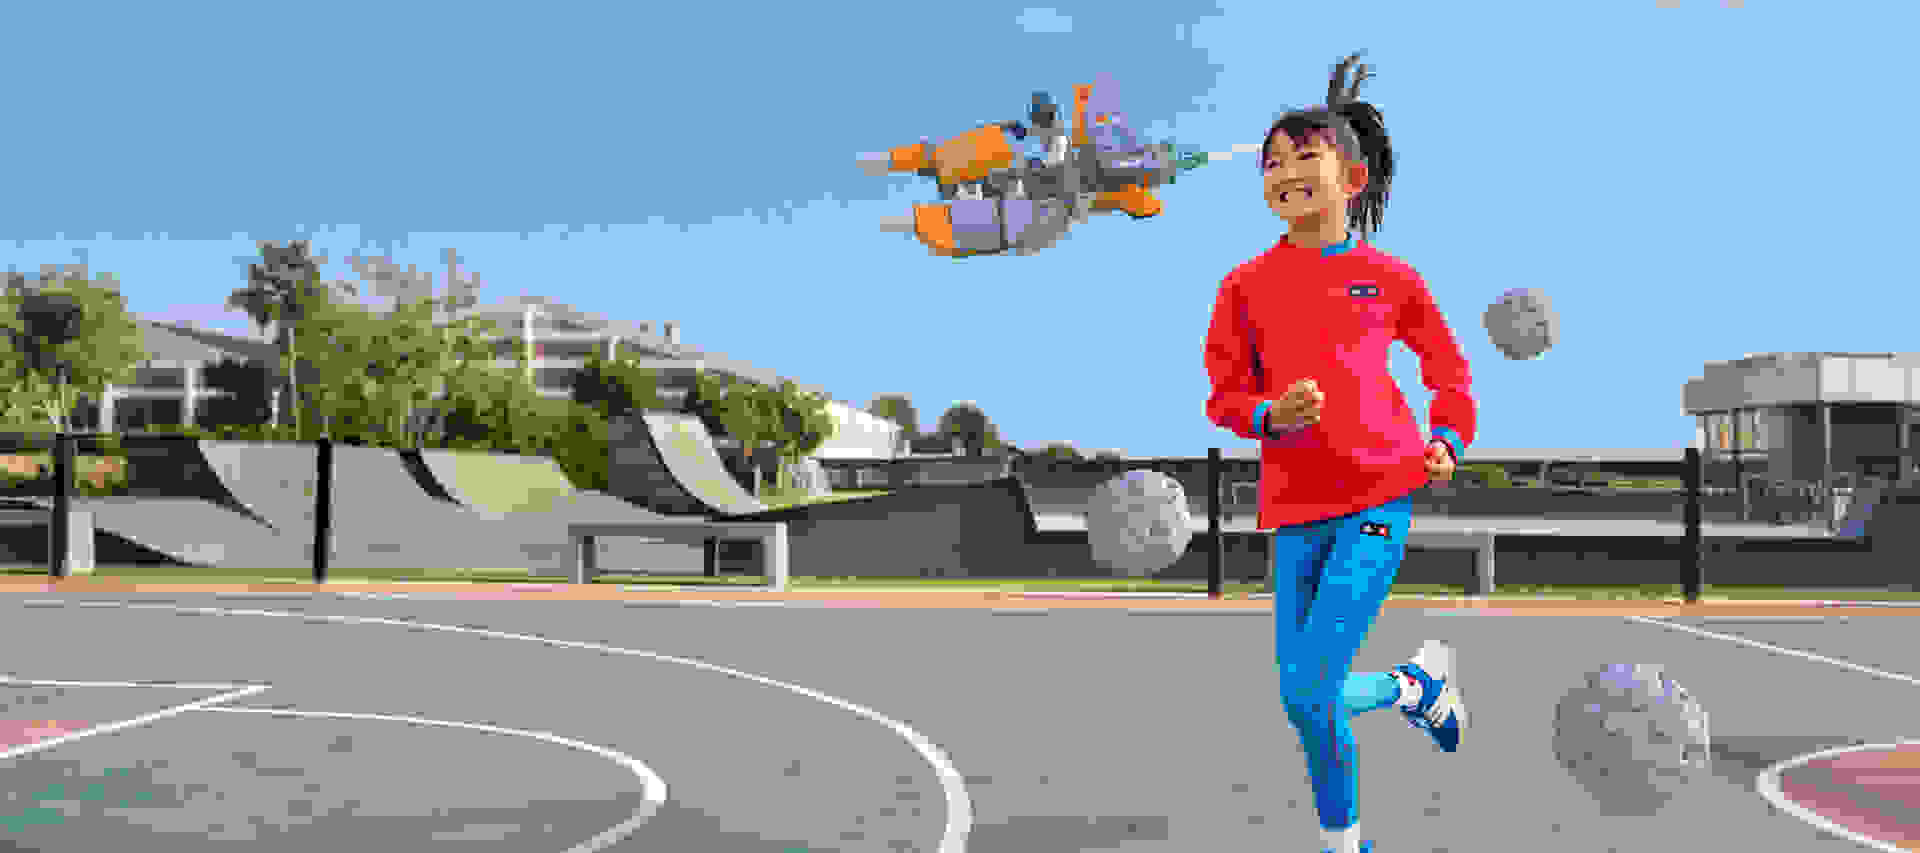 Smiling girl running through asteroids with a rocket ship flying past